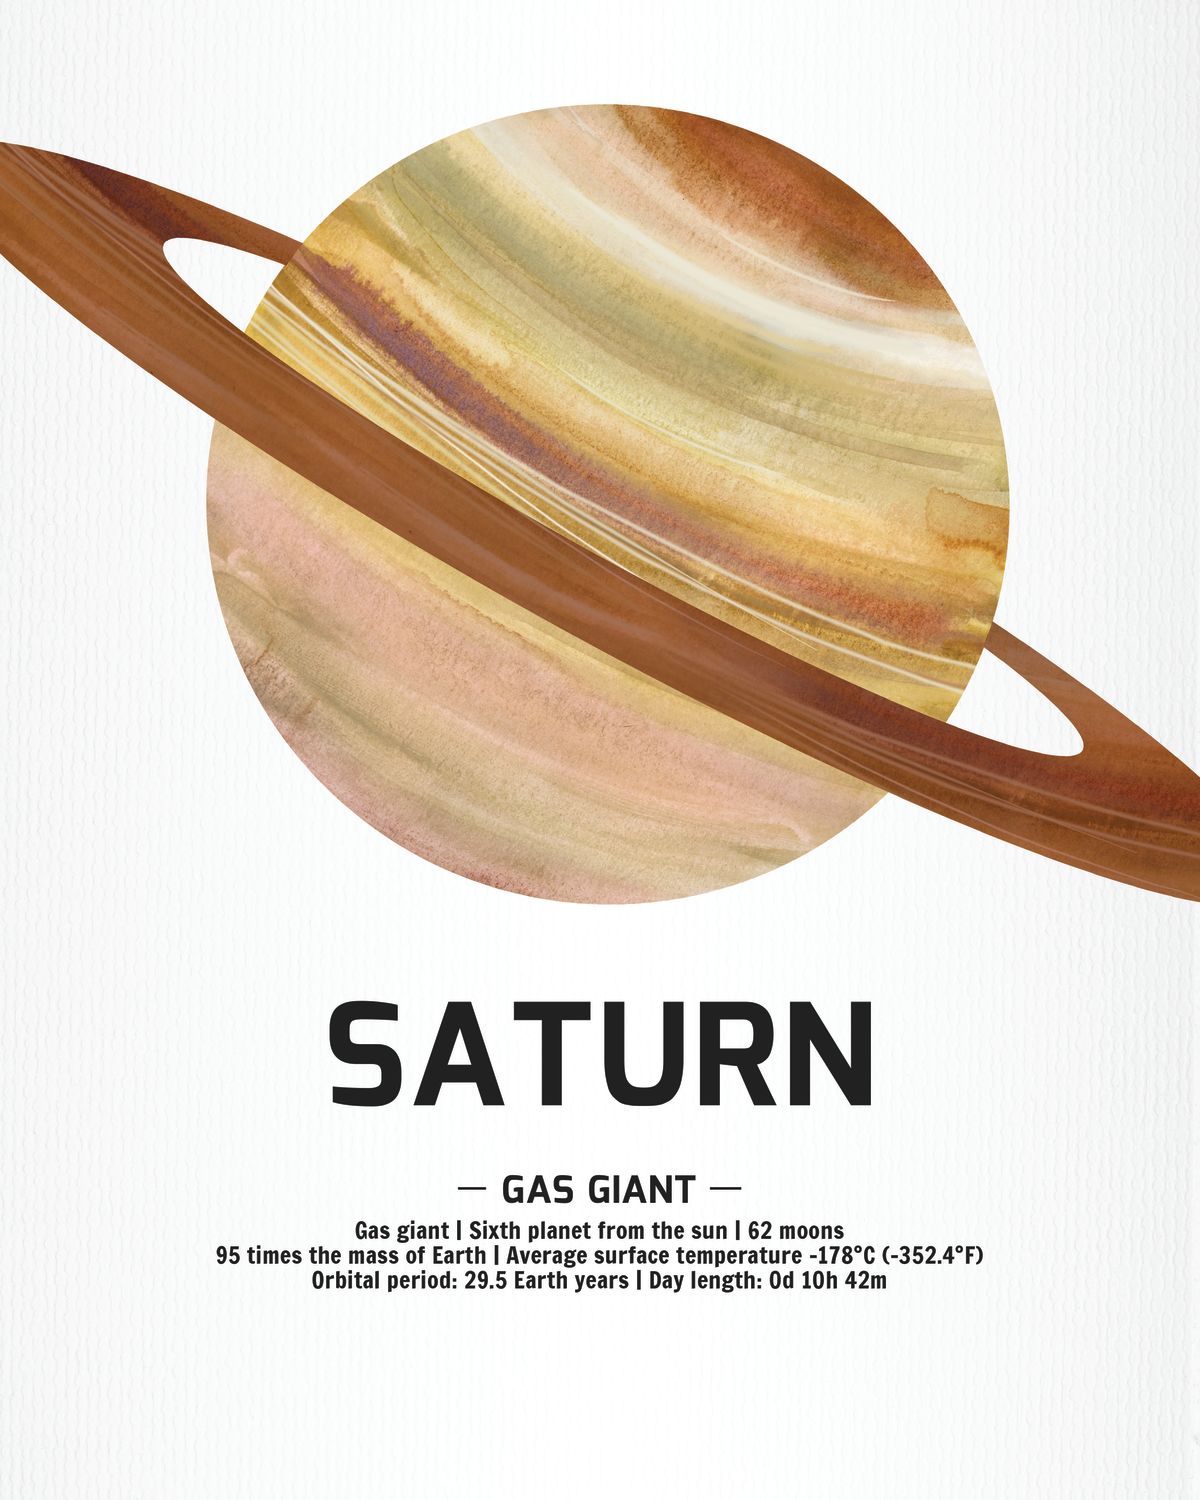 Gas Giant Saturn